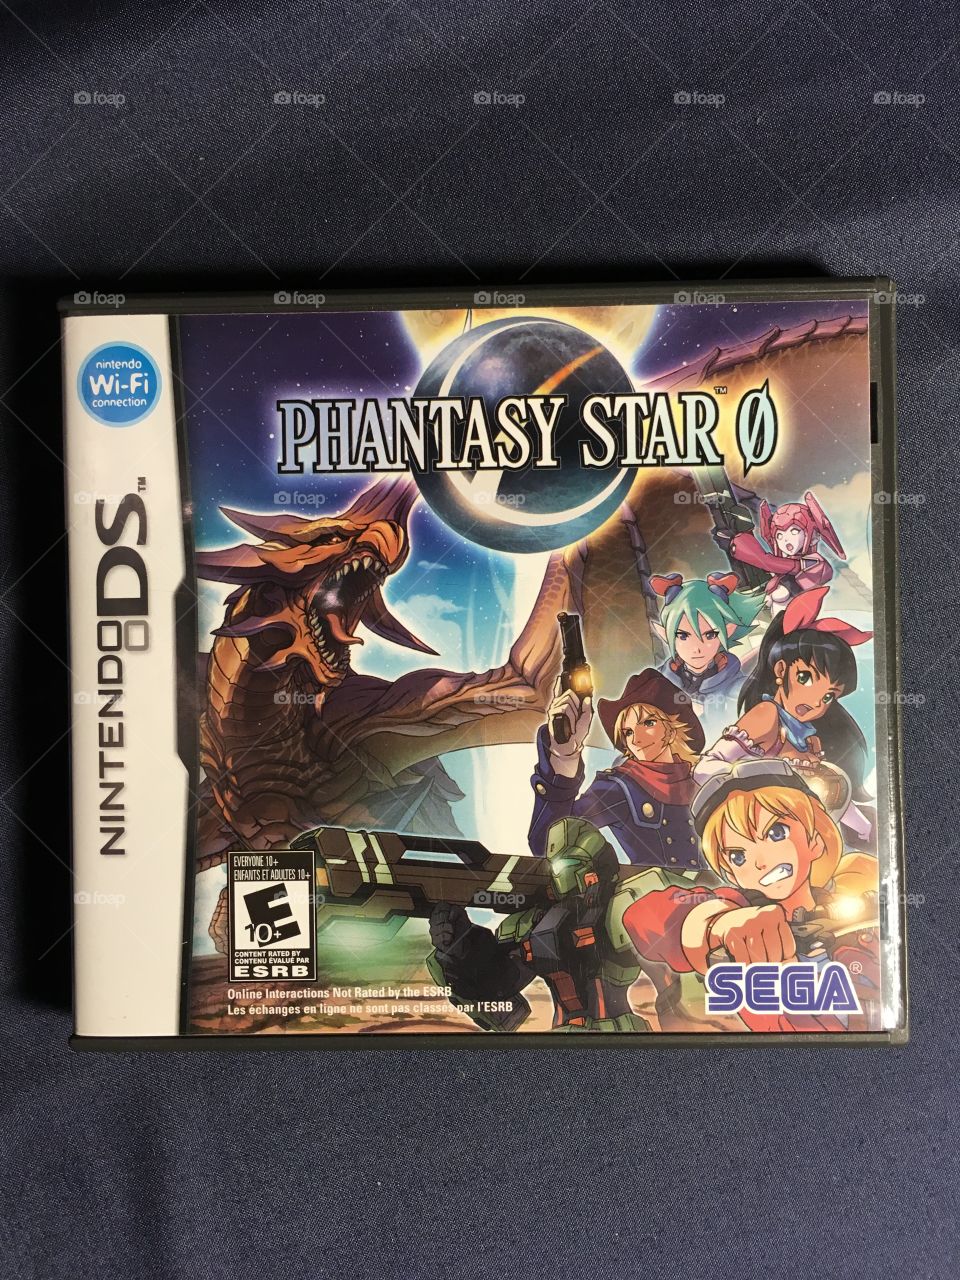 Phantasy Star 0 video game for the Nintendo DS - released 2009